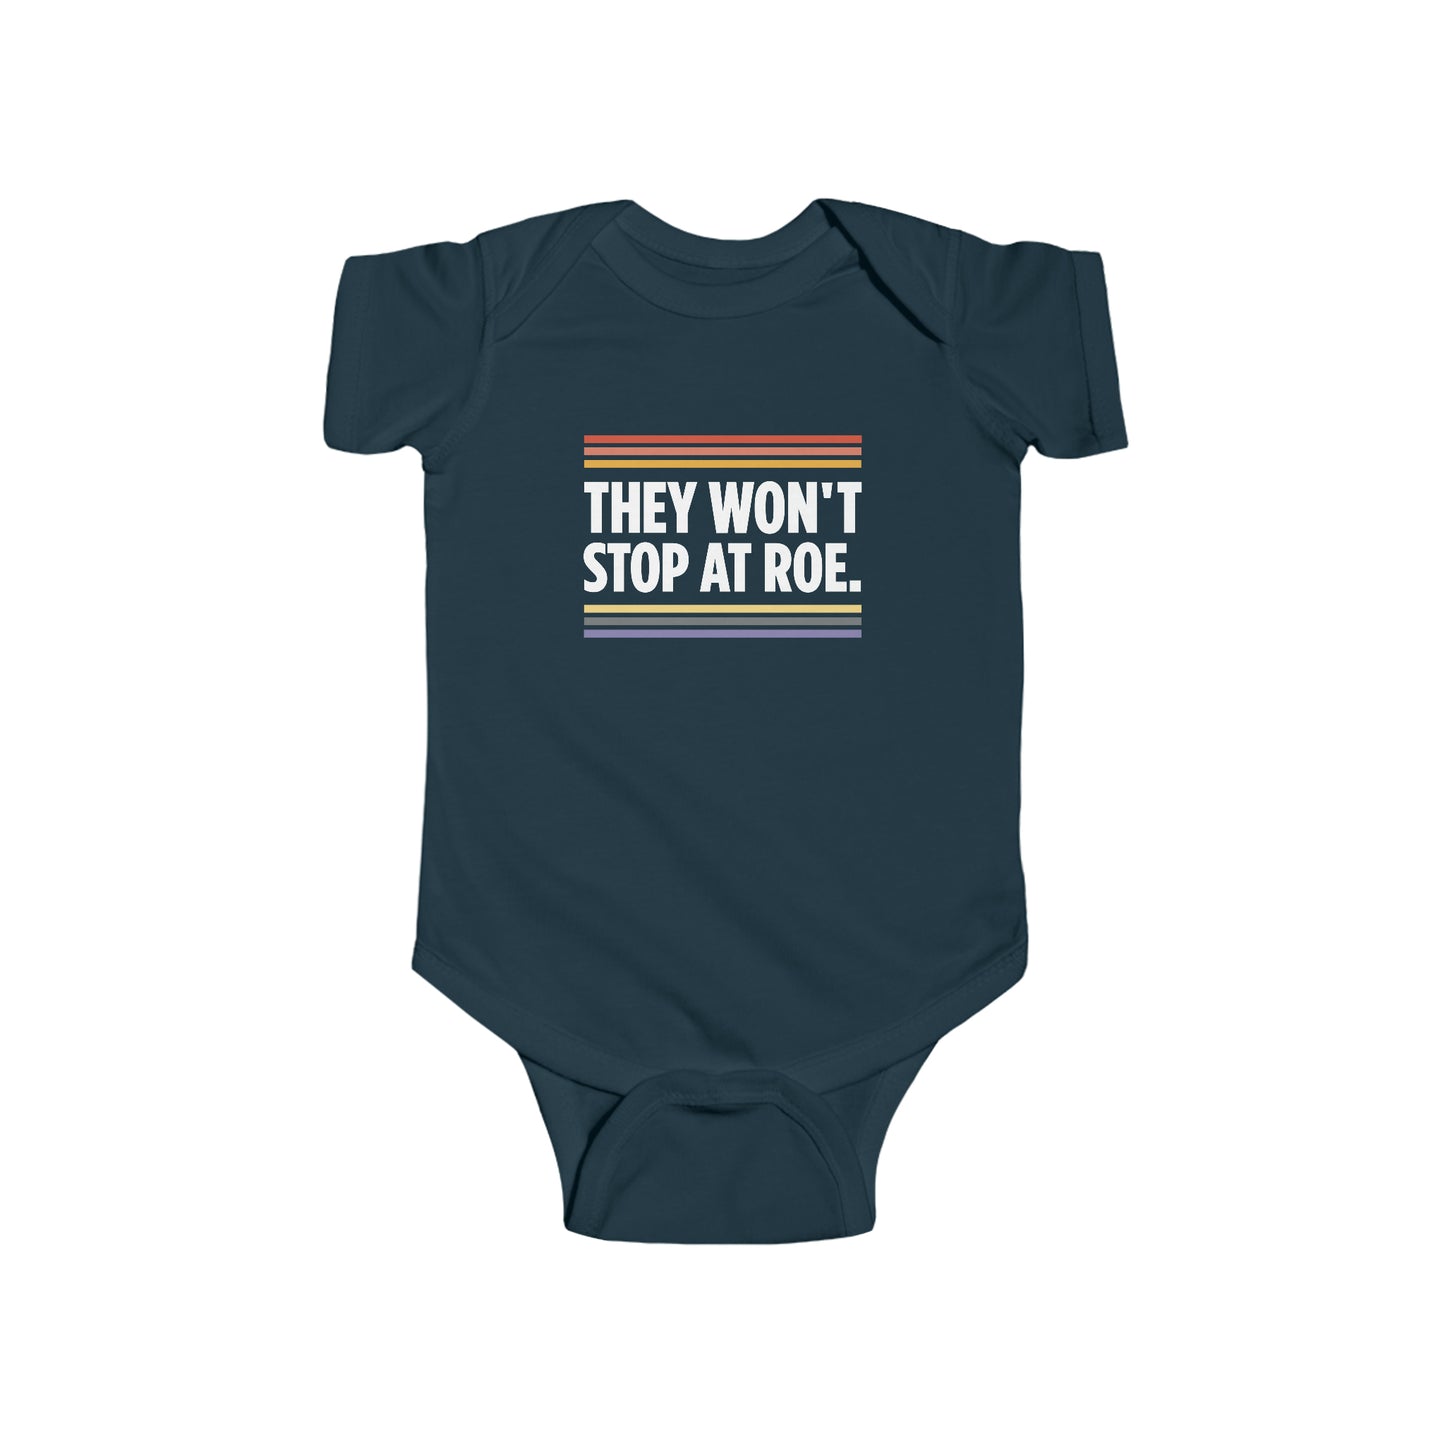 "They Won't Stop at Roe" Infant Onesie